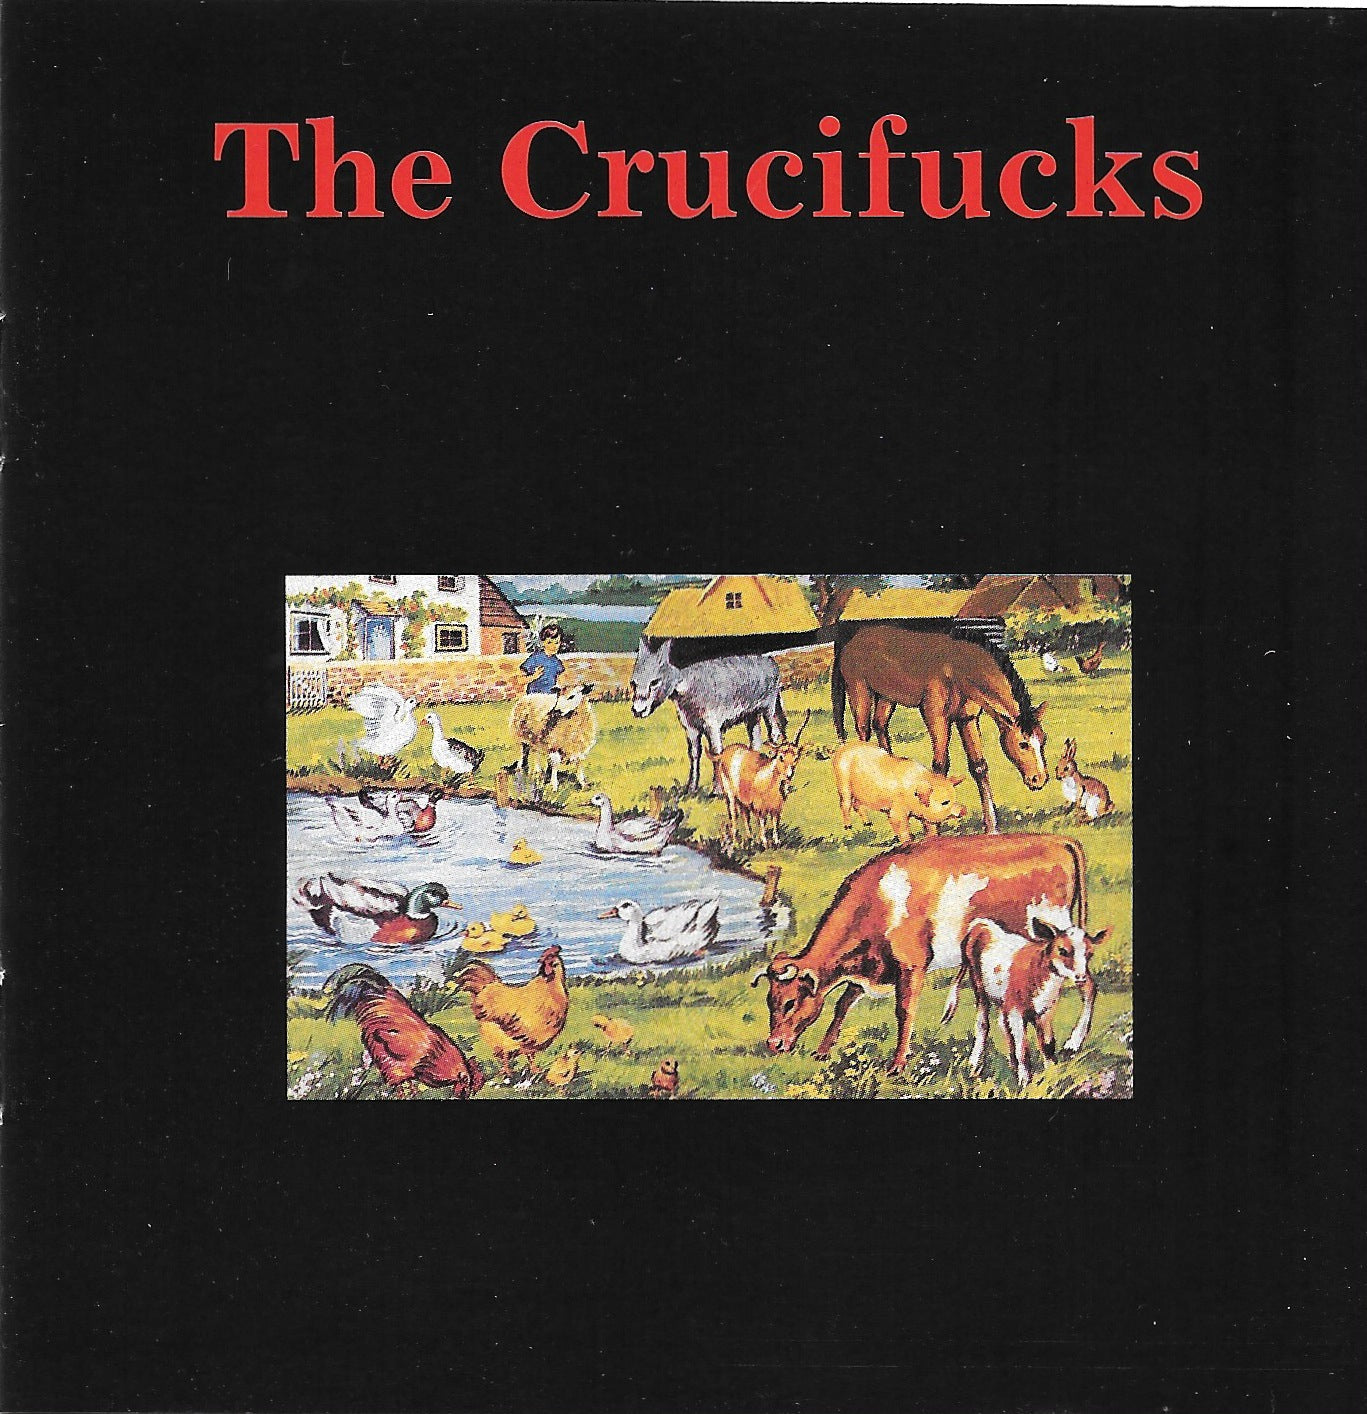 v111 - The Crucifucks - "Our Will Be Done"